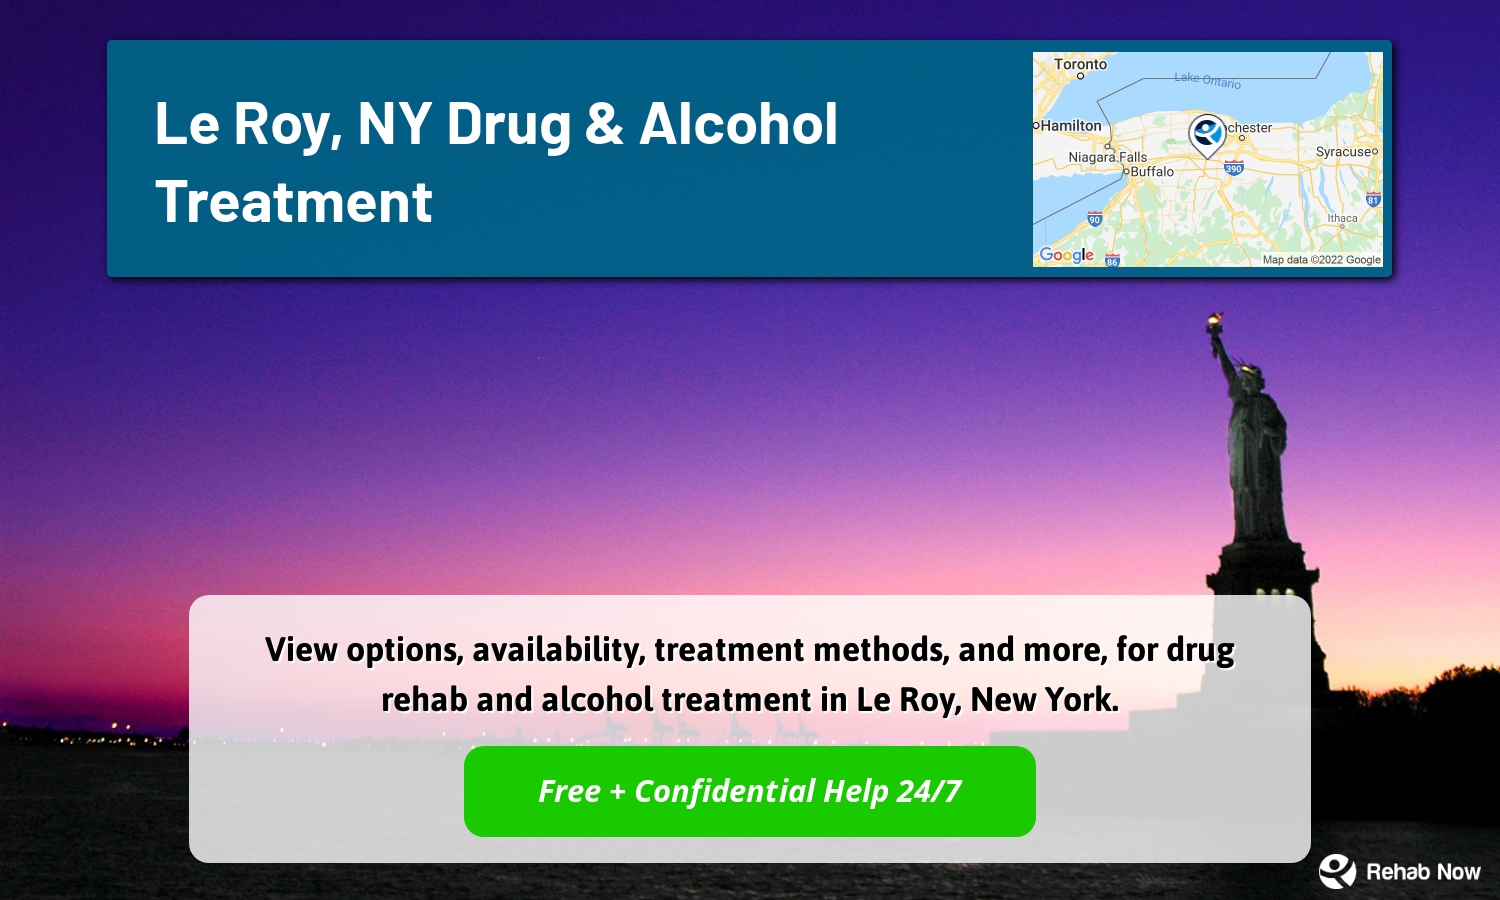 View options, availability, treatment methods, and more, for drug rehab and alcohol treatment in Le Roy, New York.